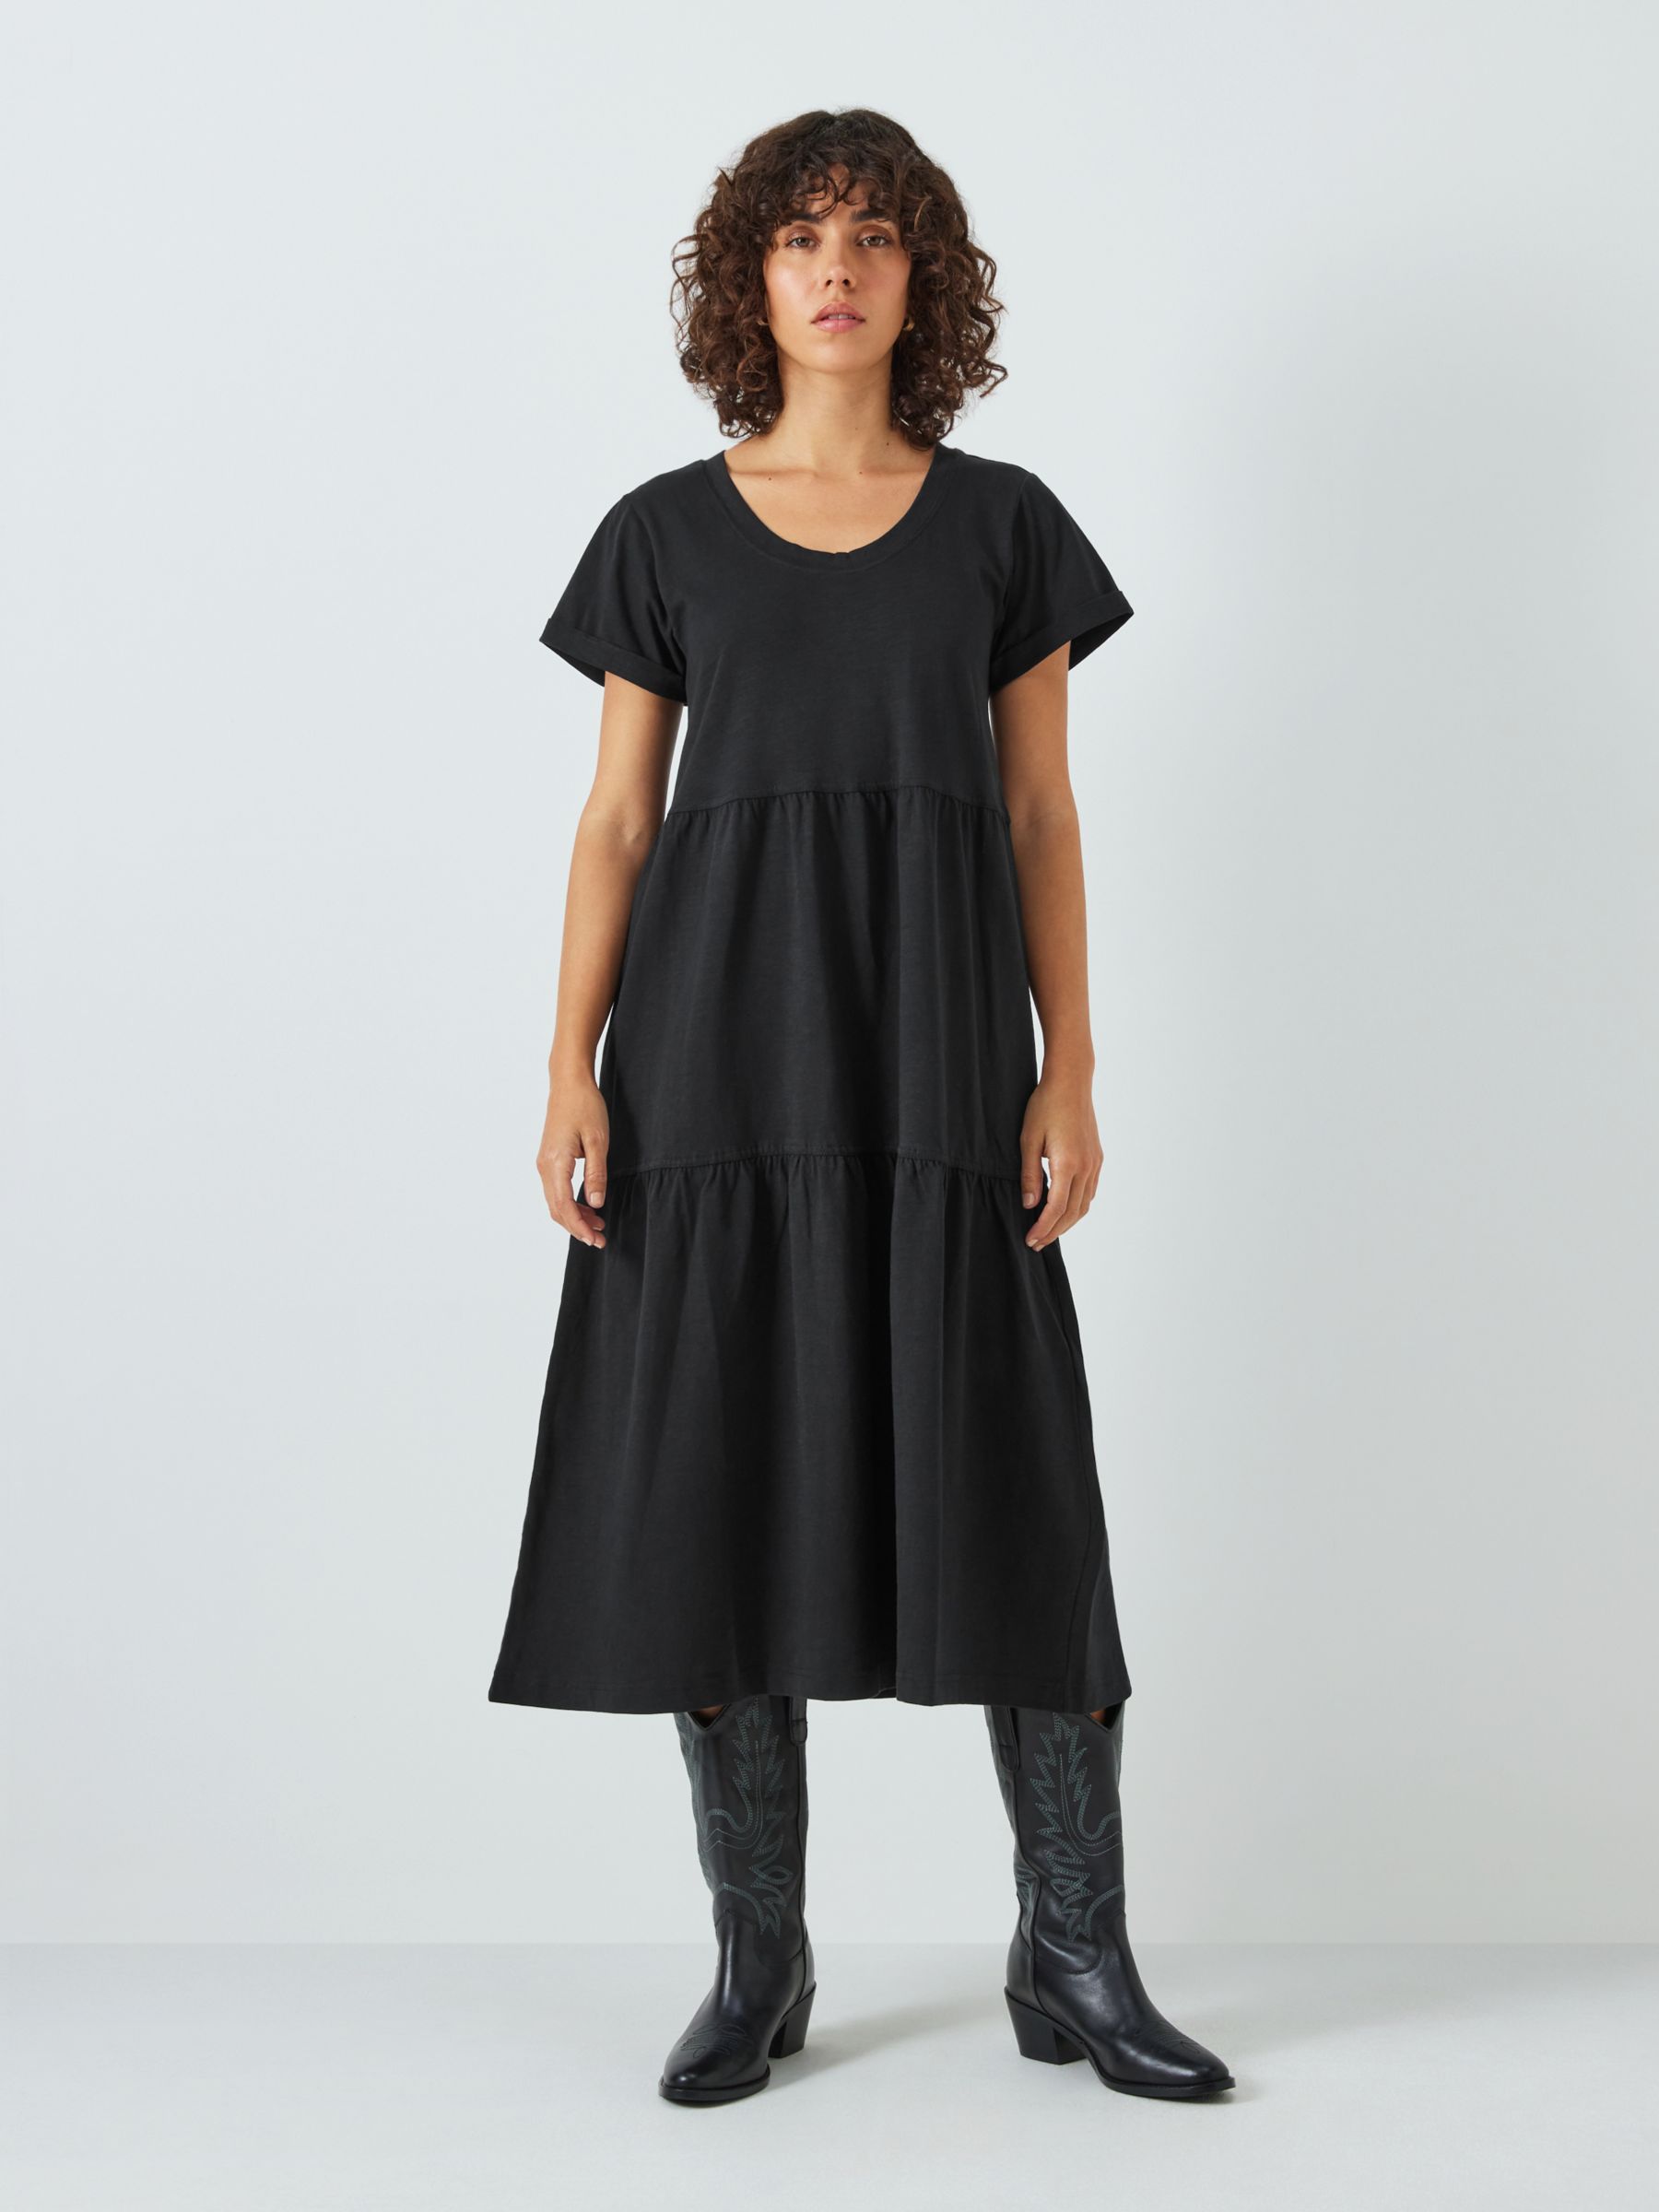 AND/OR Bernie Cotton Jersey Dress, Black, 6